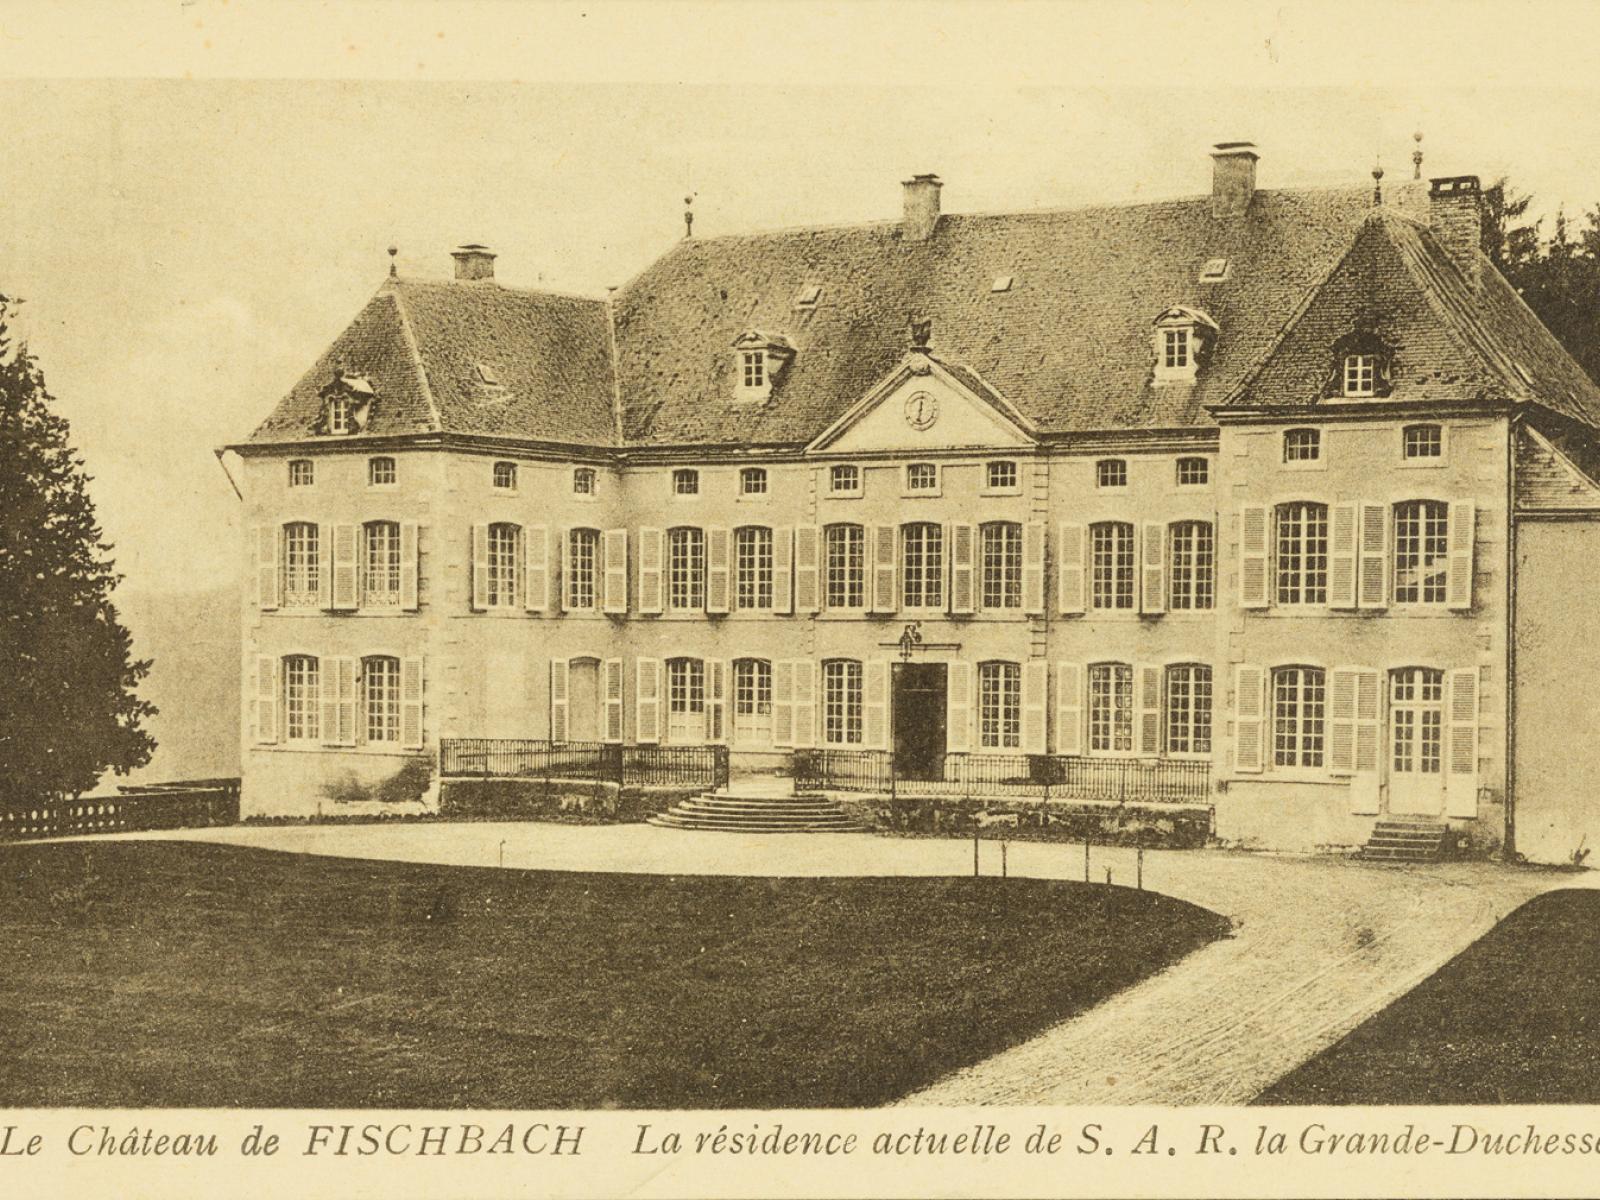 Postcard from Fischbach Castle